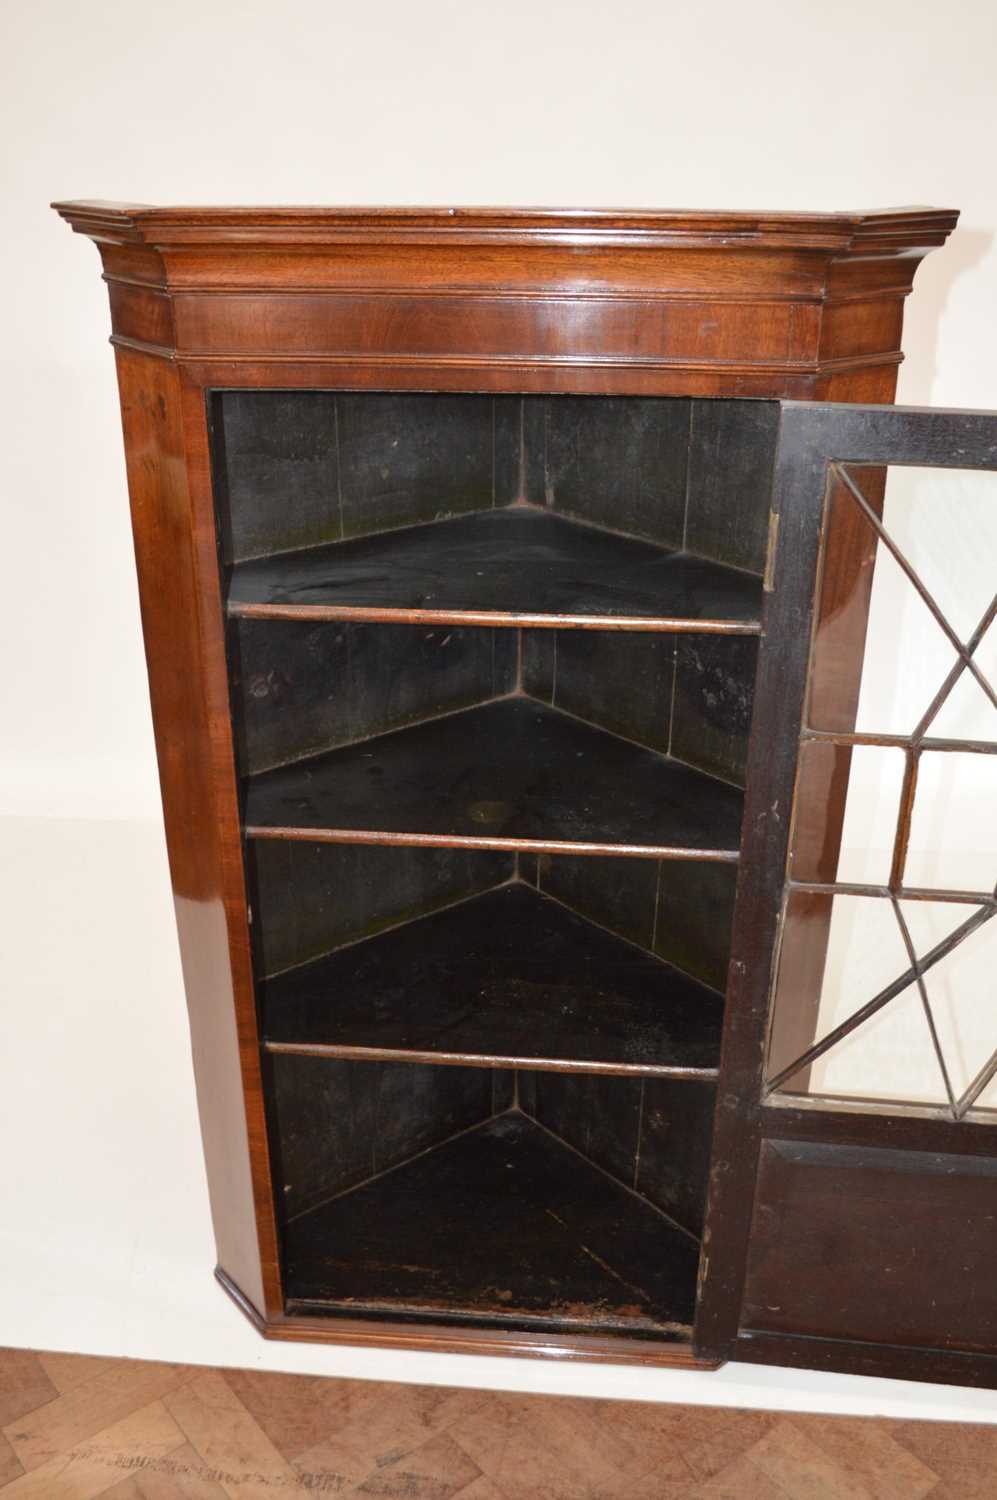 Early 19th Century Corner Cabinet - Image 2 of 3